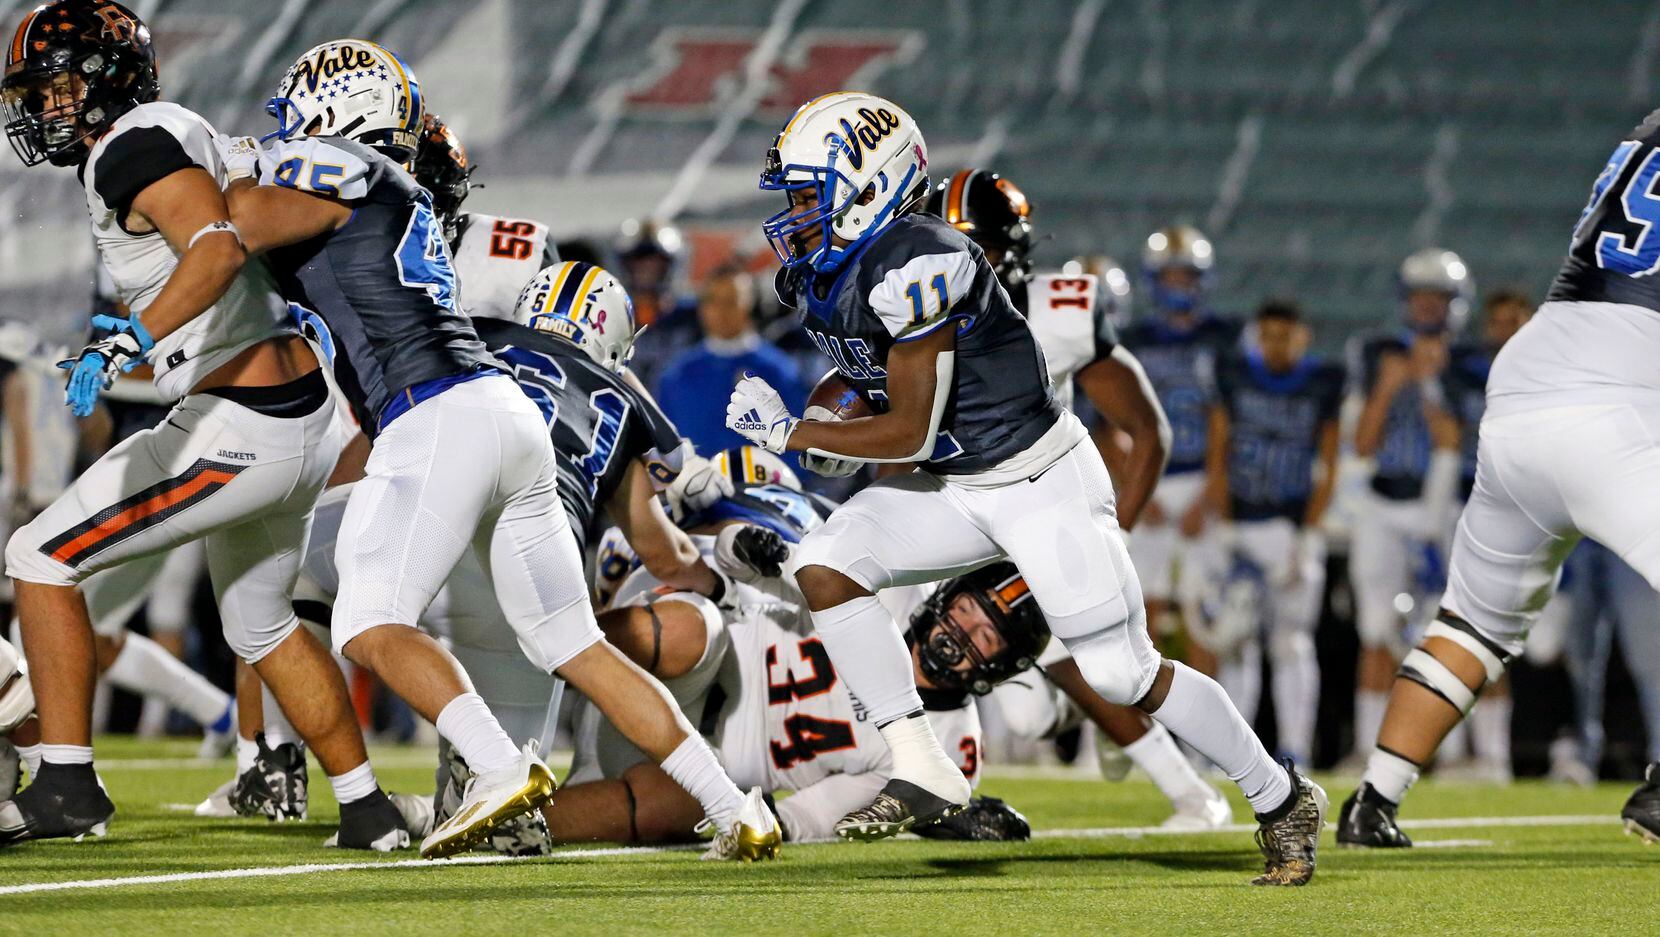 Sunnyvale RB Evan Johnson (11) picks up yardage during the first half of a high school...